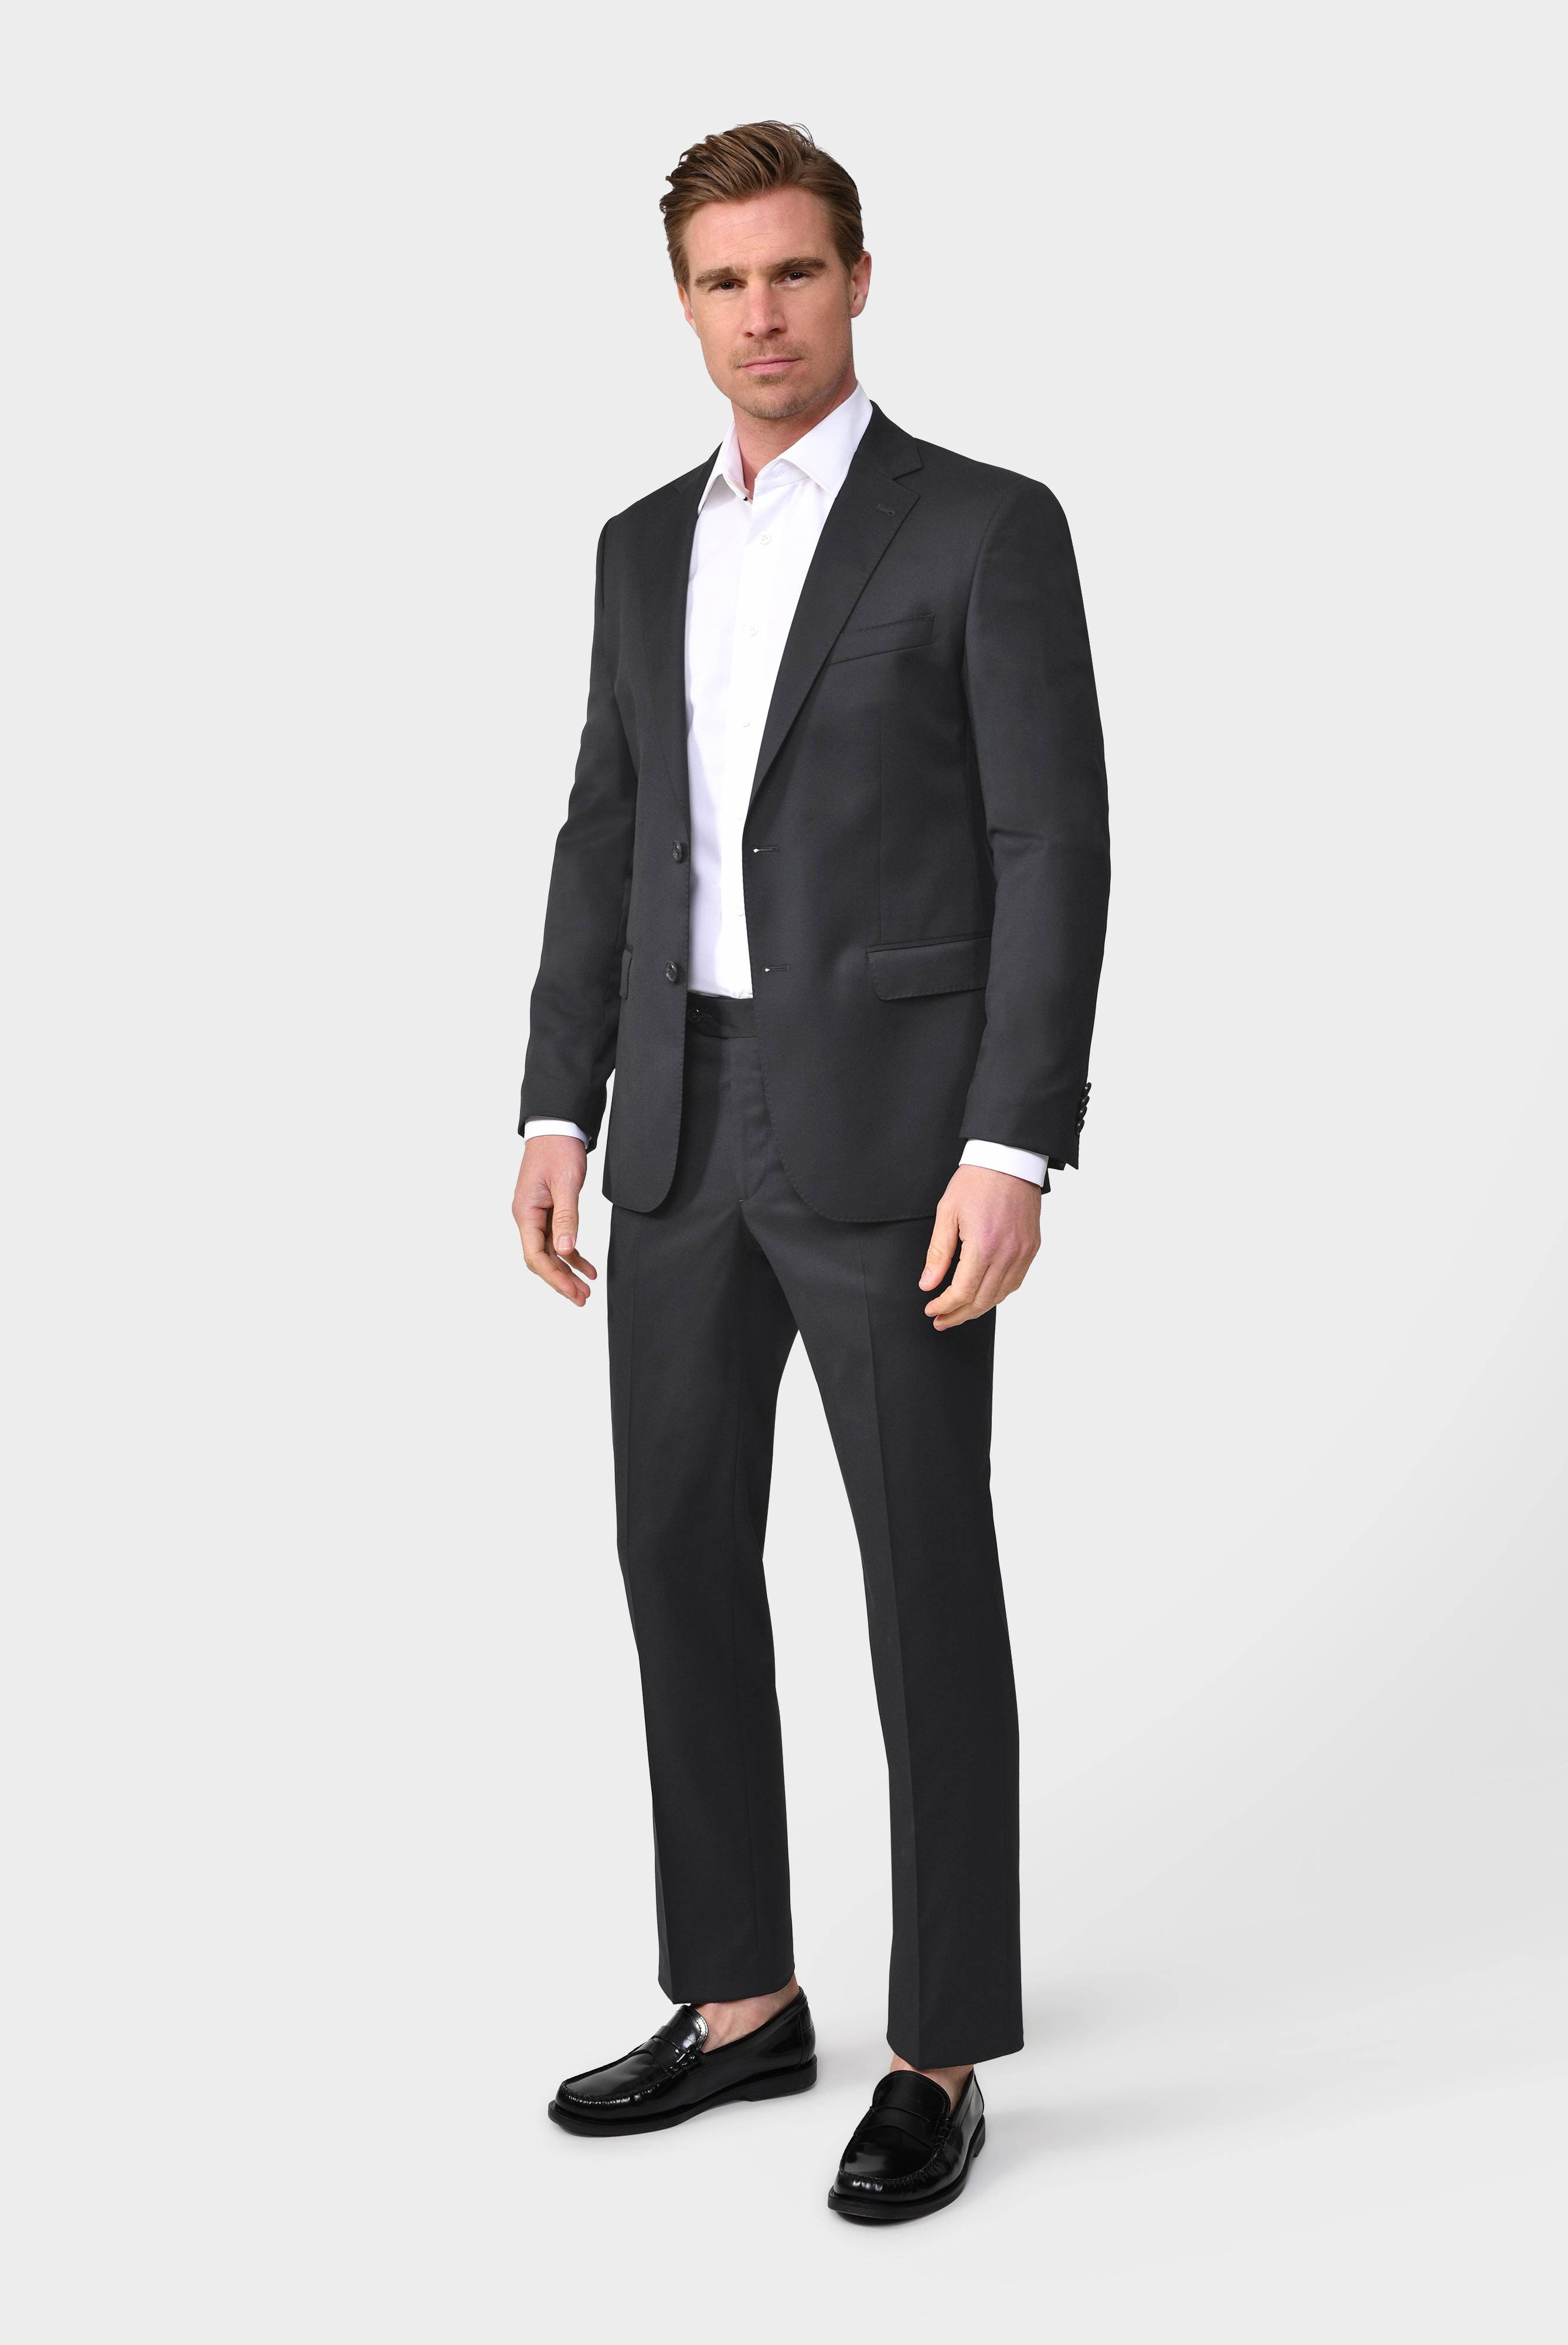 Jeans & Trousers+Men''s pants made of merino wool+80.7804.16.H01000.090.48